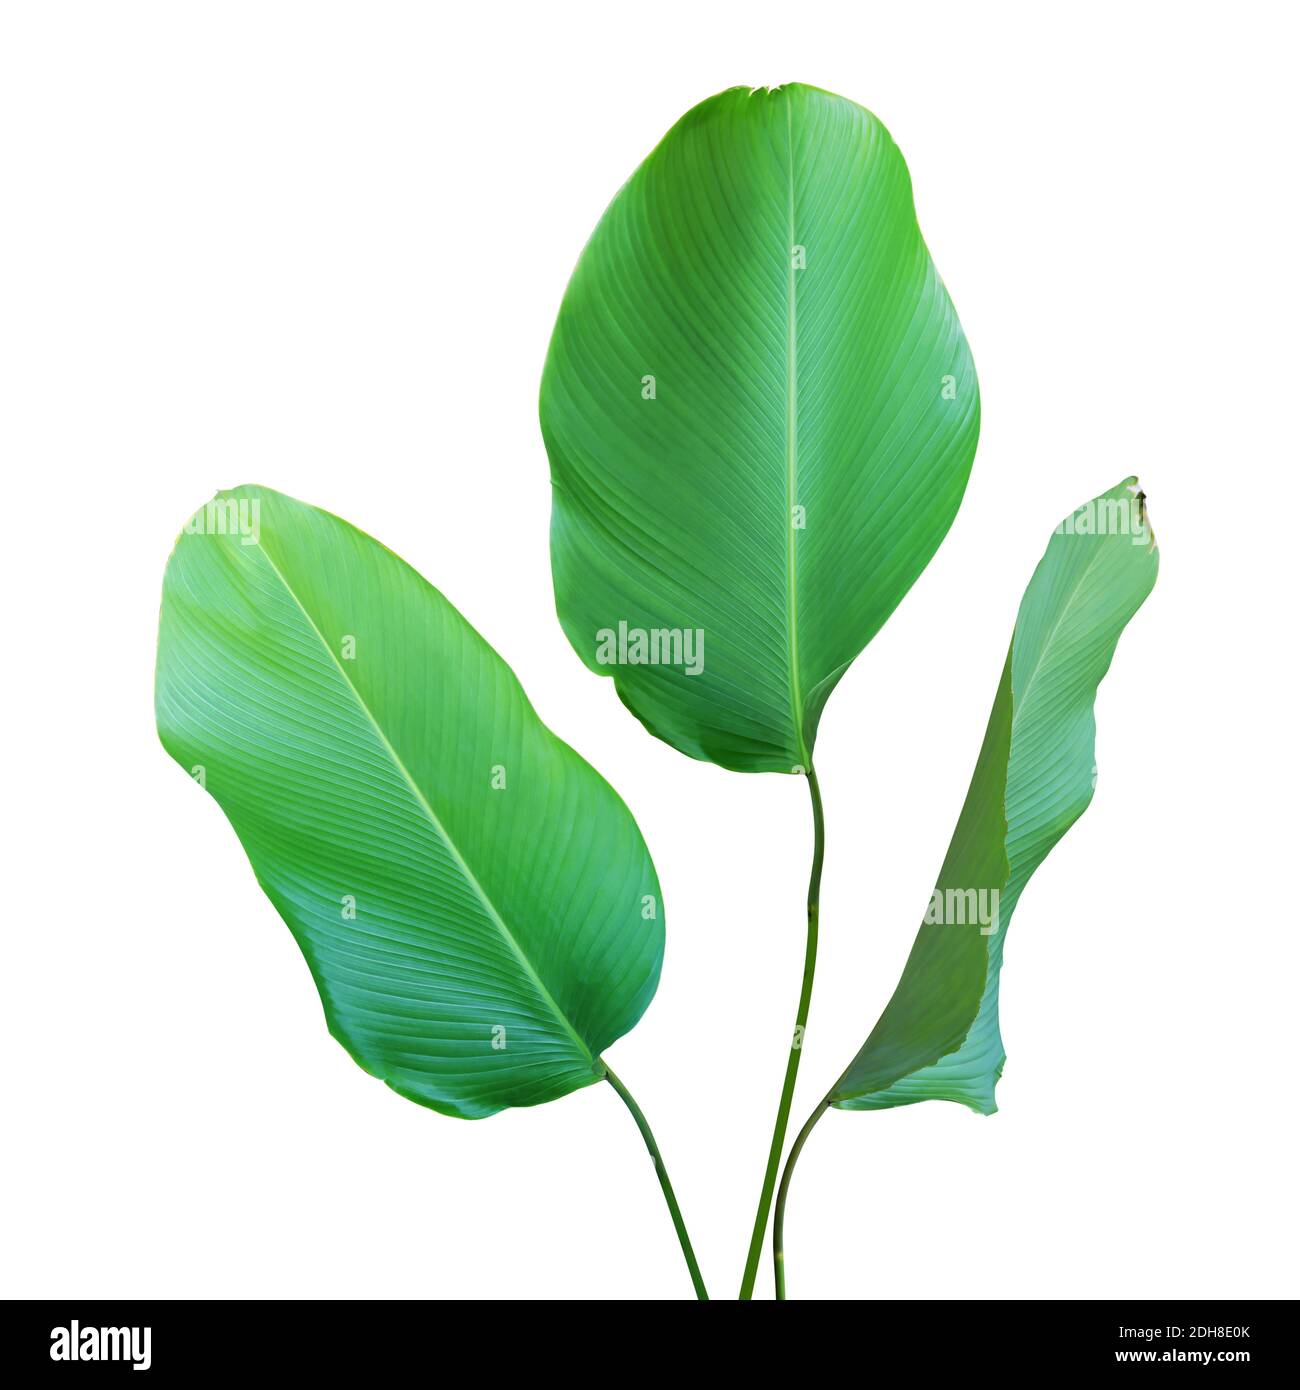 Tropical Green Leaves of Calathea lutea (Aubl.) G. Mey., Cigar Calathea Plant Isolated on White Background Stock Photo